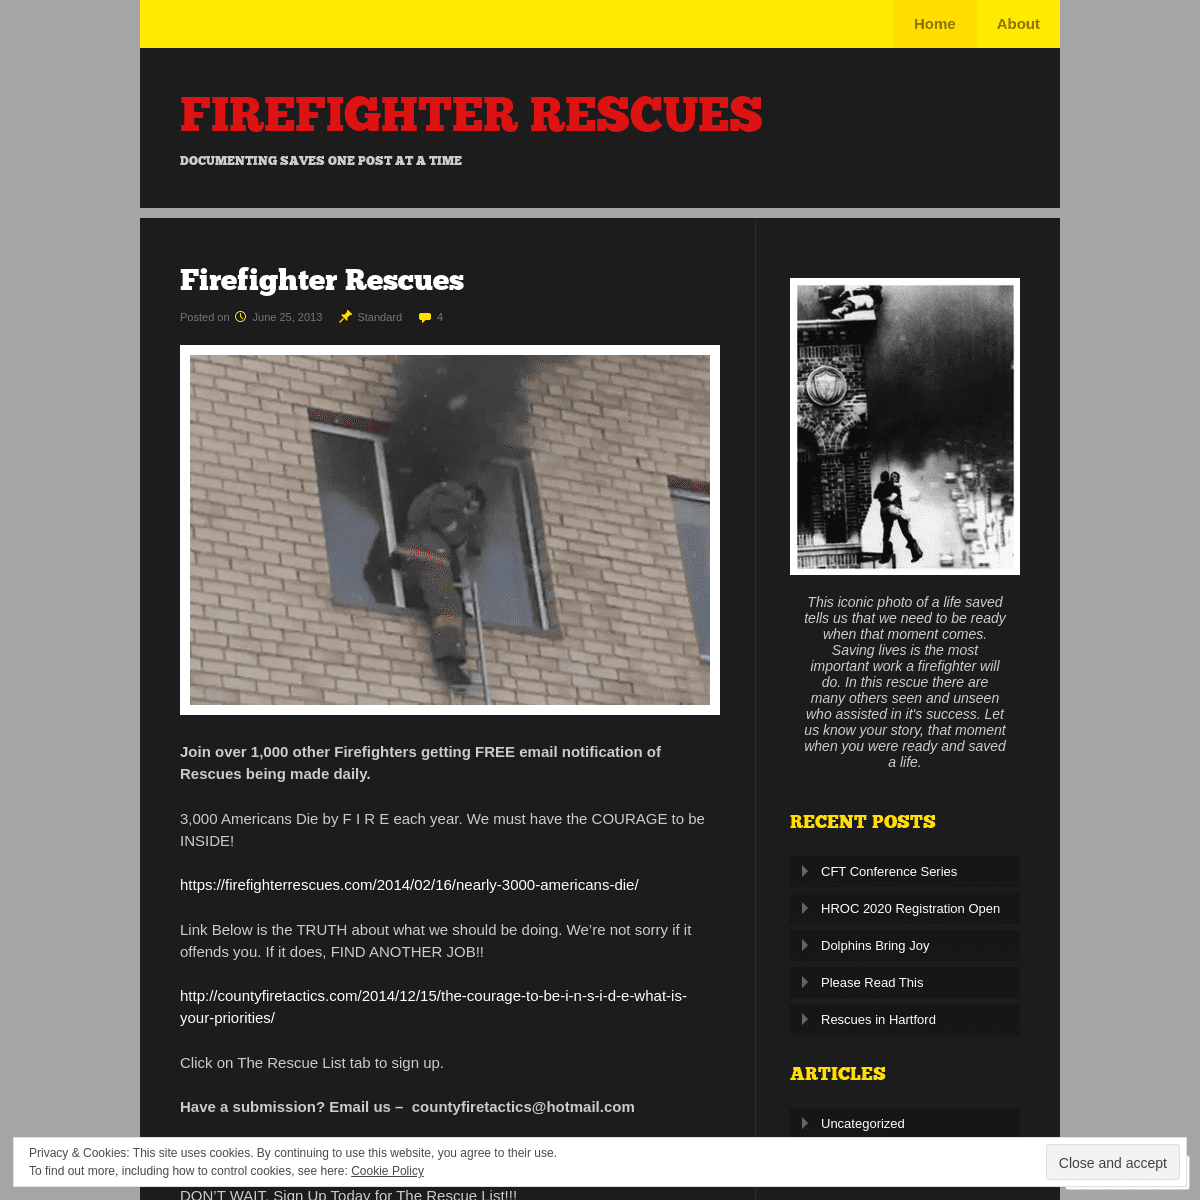 A complete backup of firefighterrescues.com